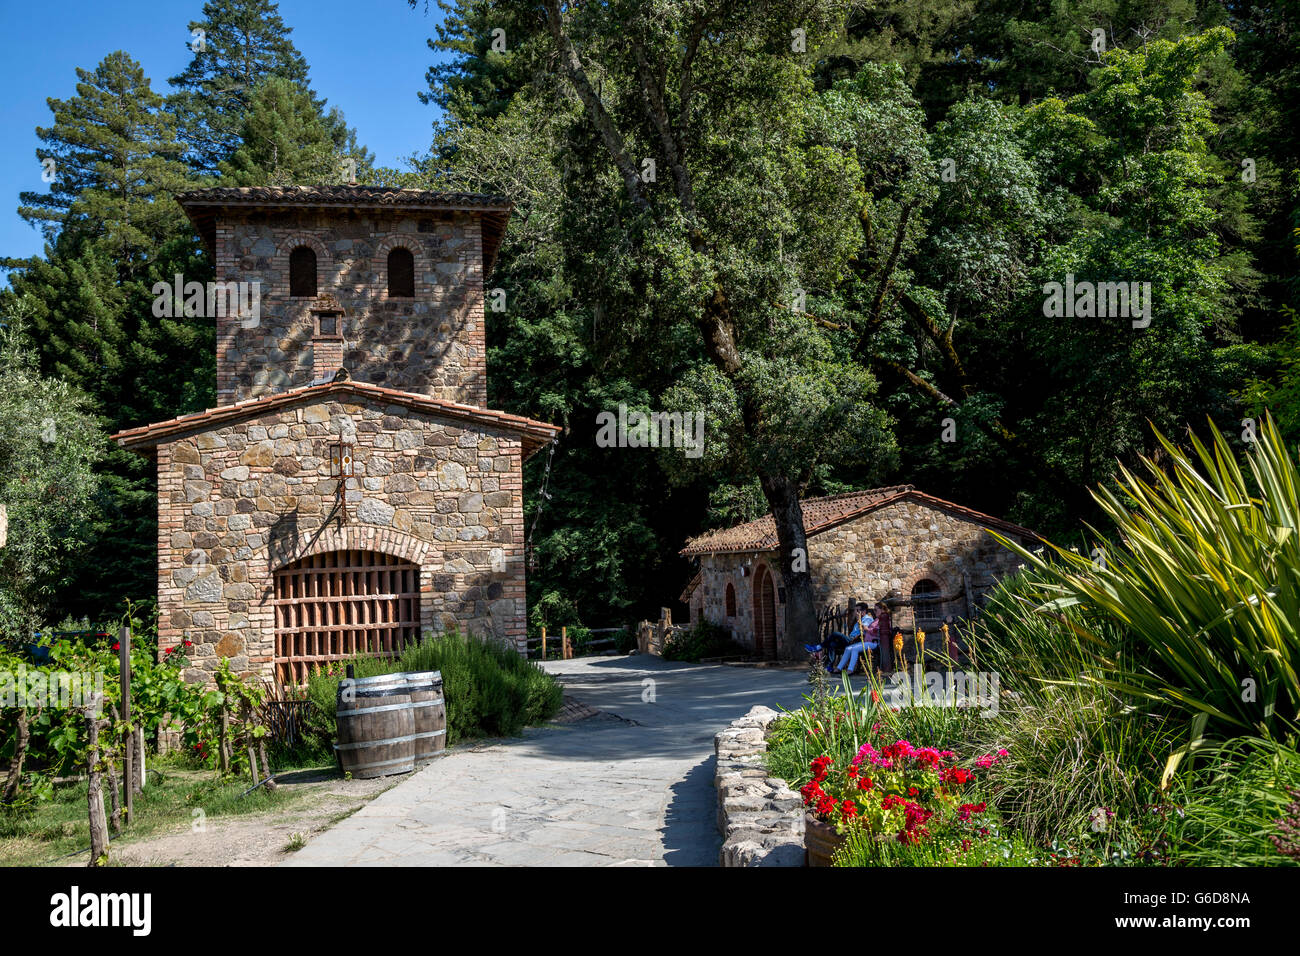 Picturesque scene of winery with stone buildings in Napa Valley, California. Stock Photo